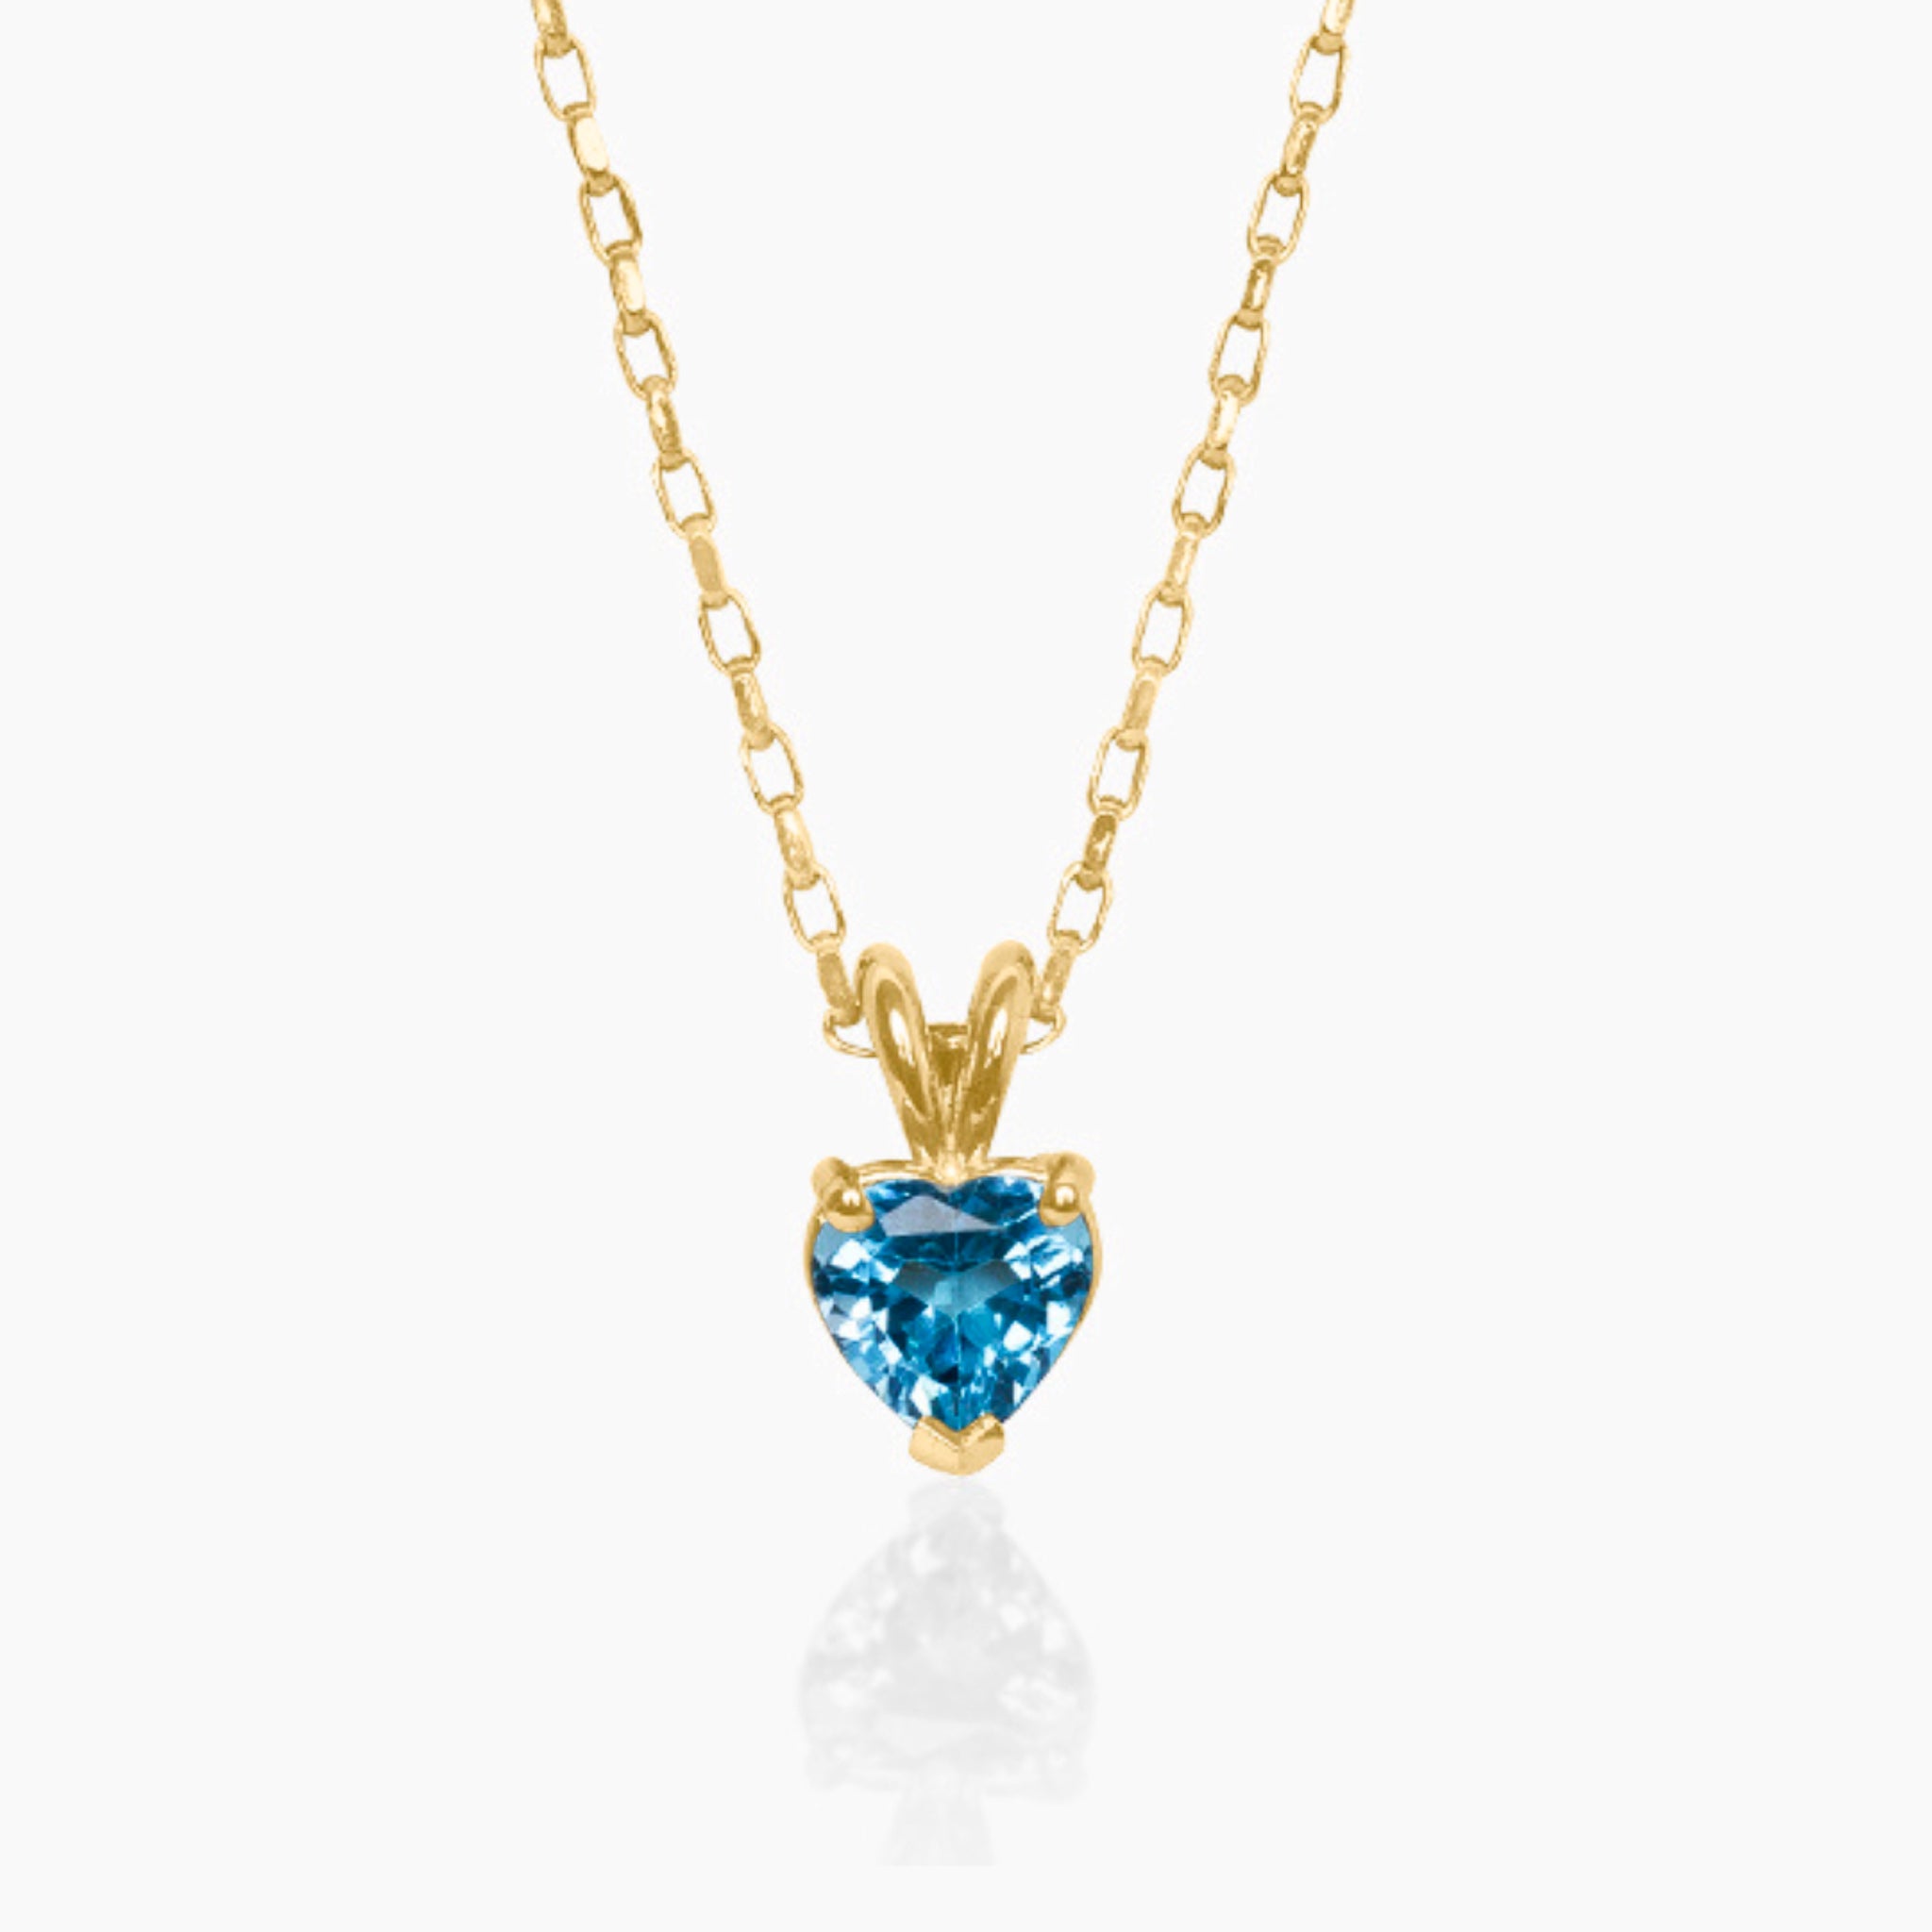 14K YELLOW GOLD BLUE TOPAZ HEART NECKLACE